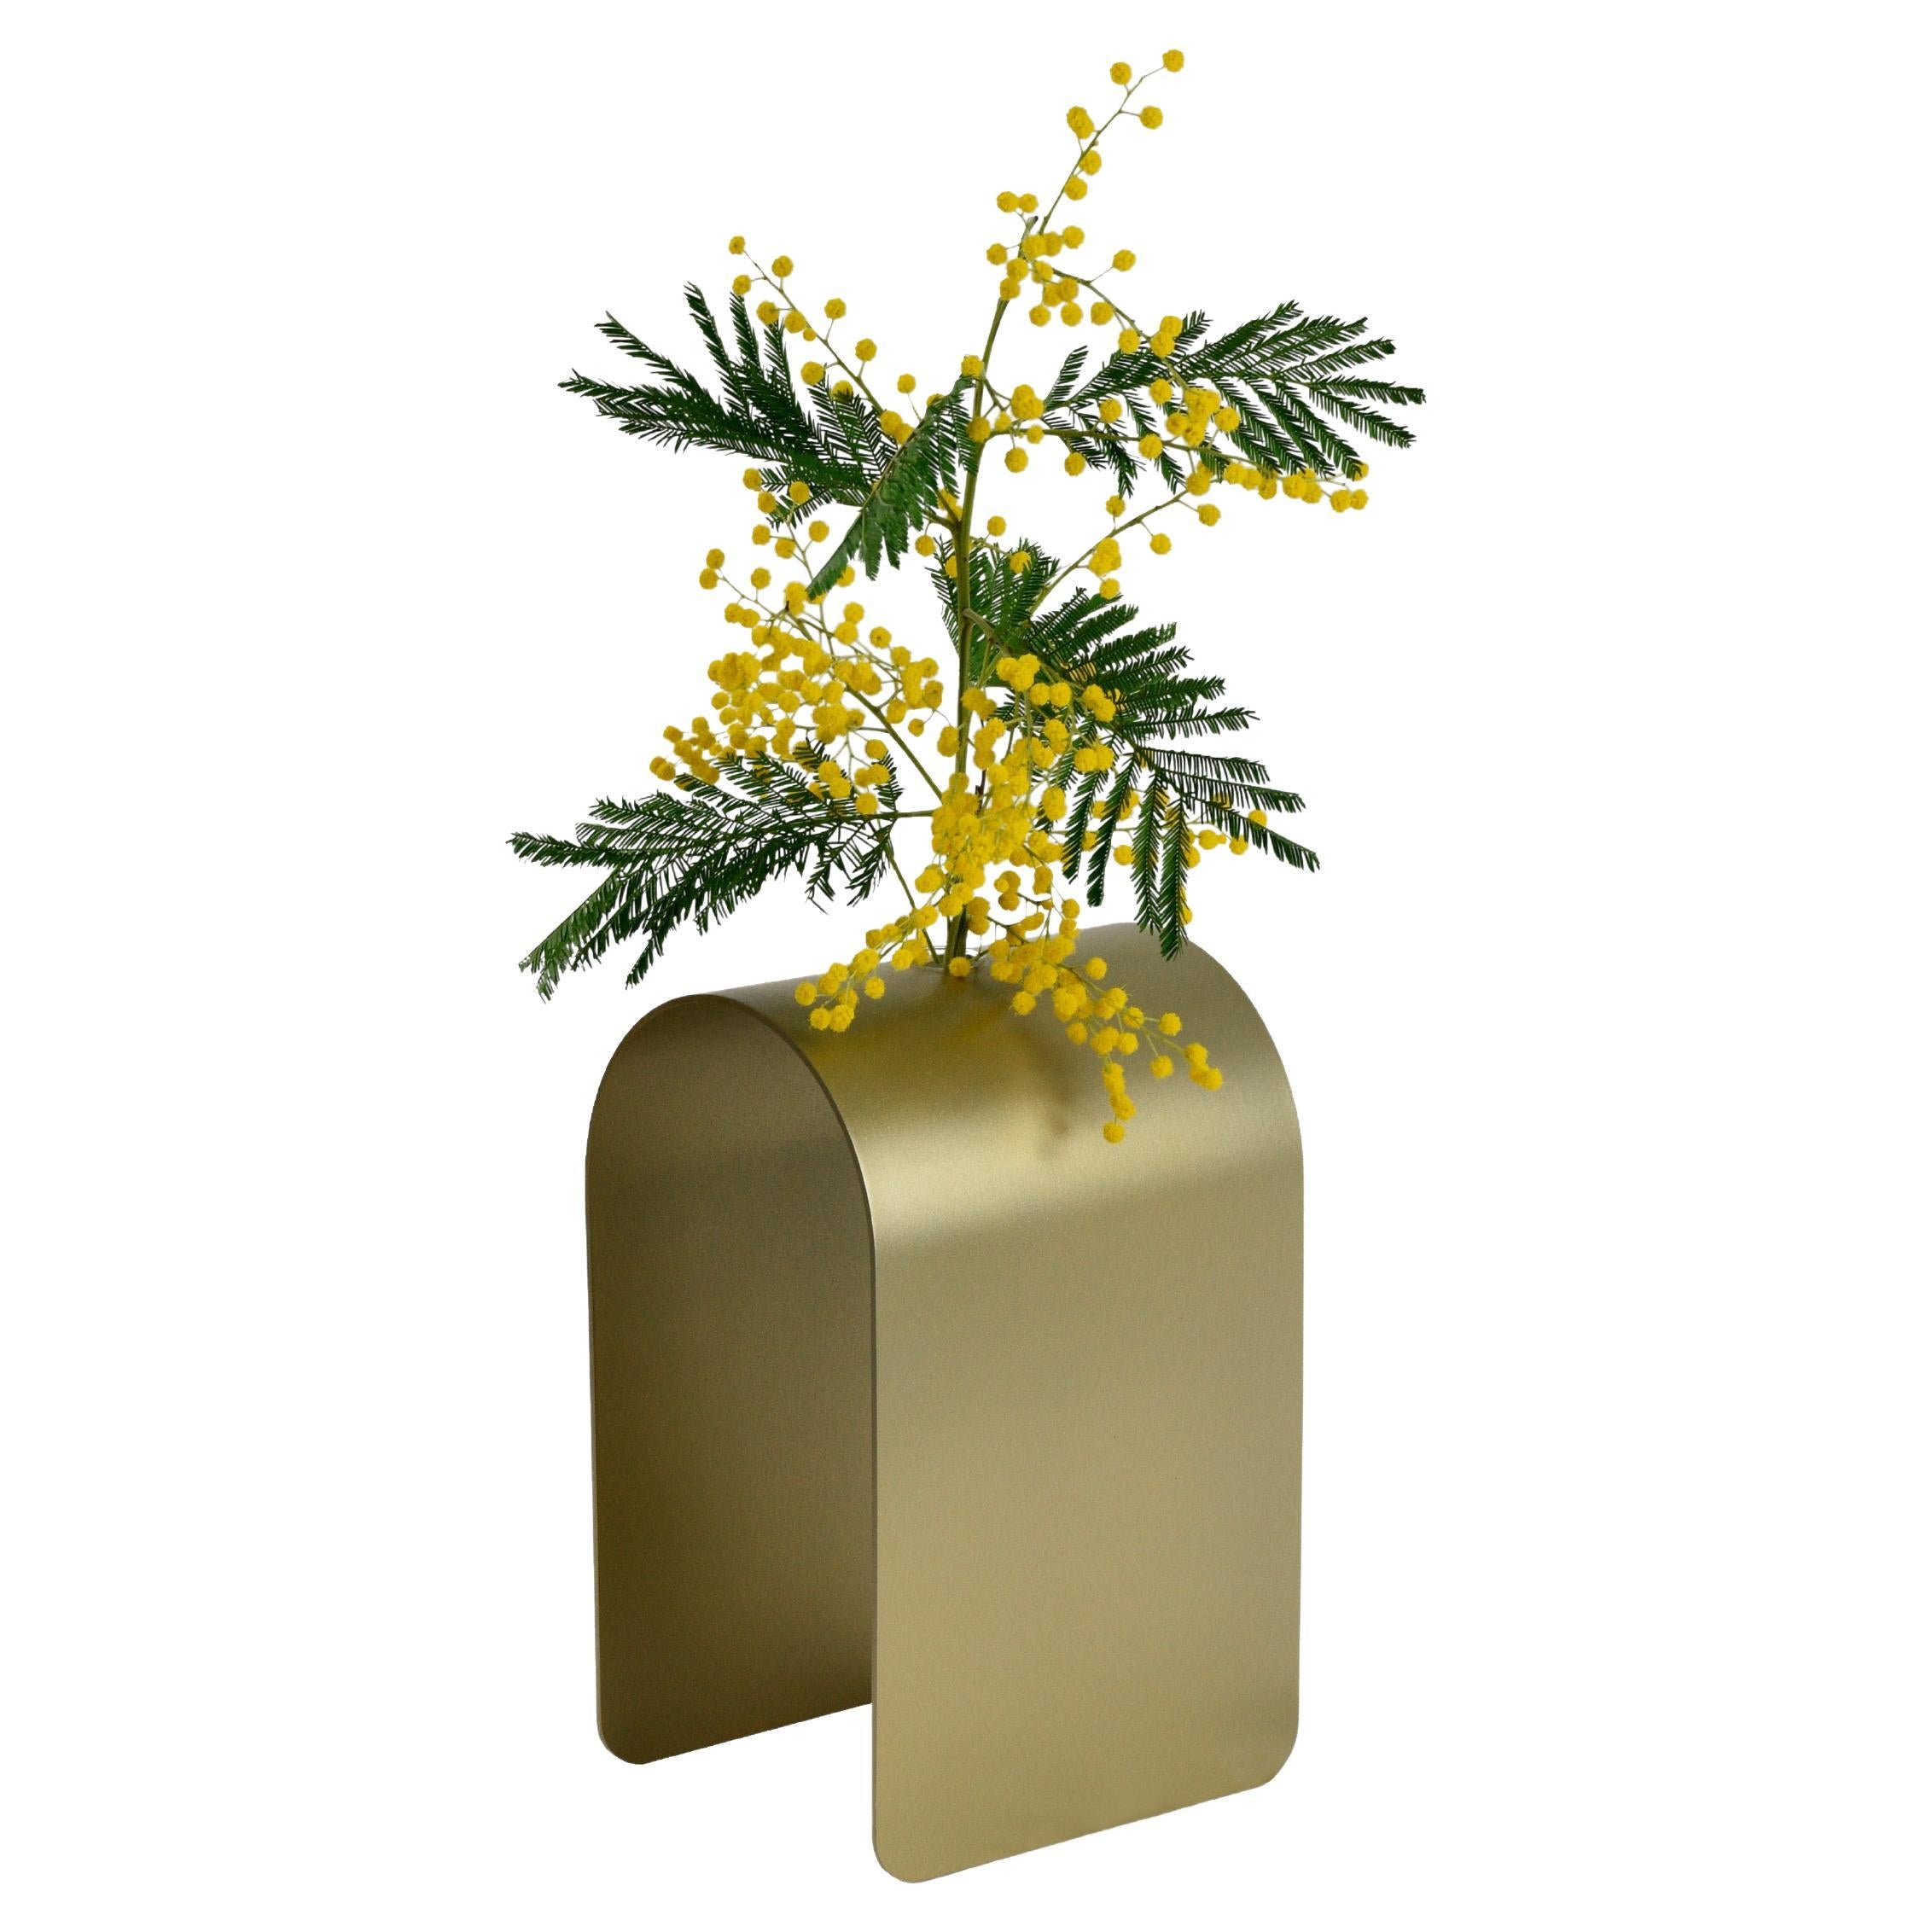 DHALIA - minimal and chic vase to be placed freely.
A design element that creates movement and lights up interior spaces.
This vase features a distinctive form composed of a tubular glass body enclosed and supported by an arched structure of